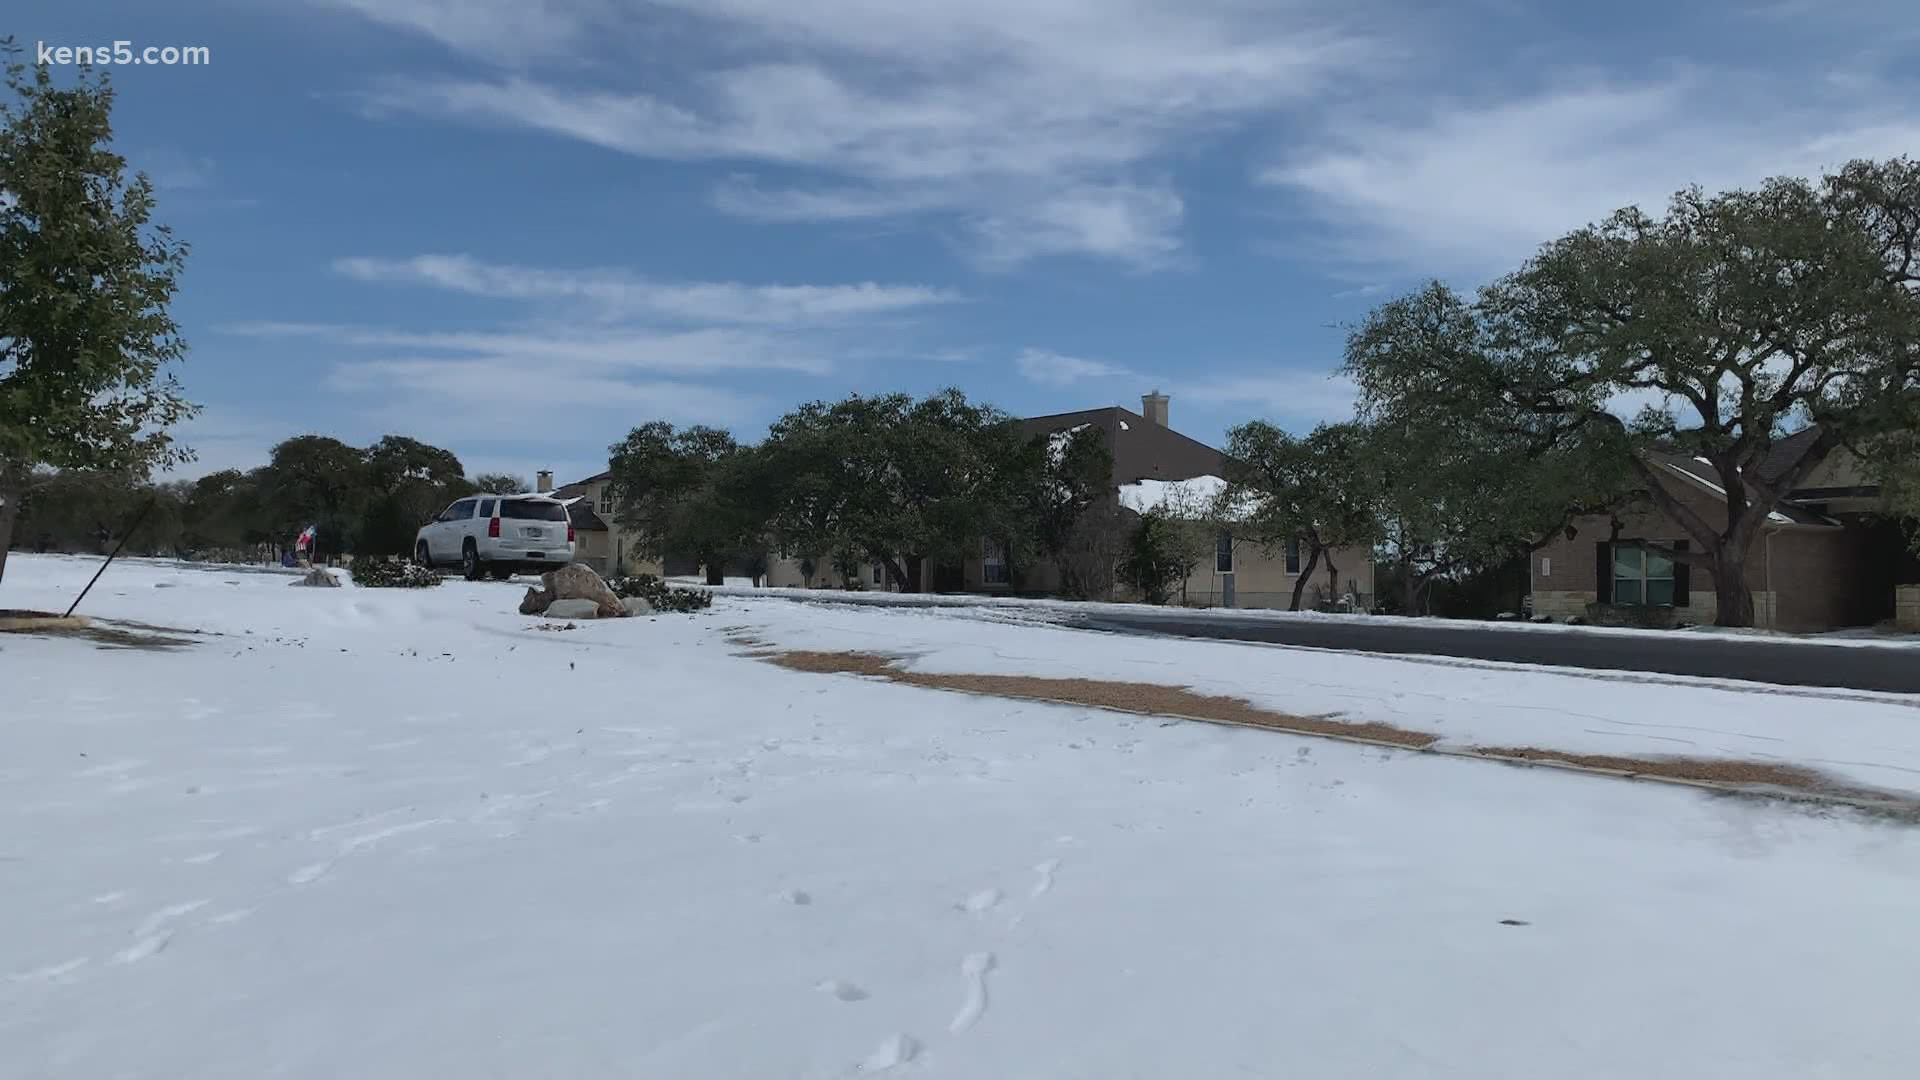 People in New Braunfels continue to struggle with power and water issues as the city remains gripped by freezing temperatures.